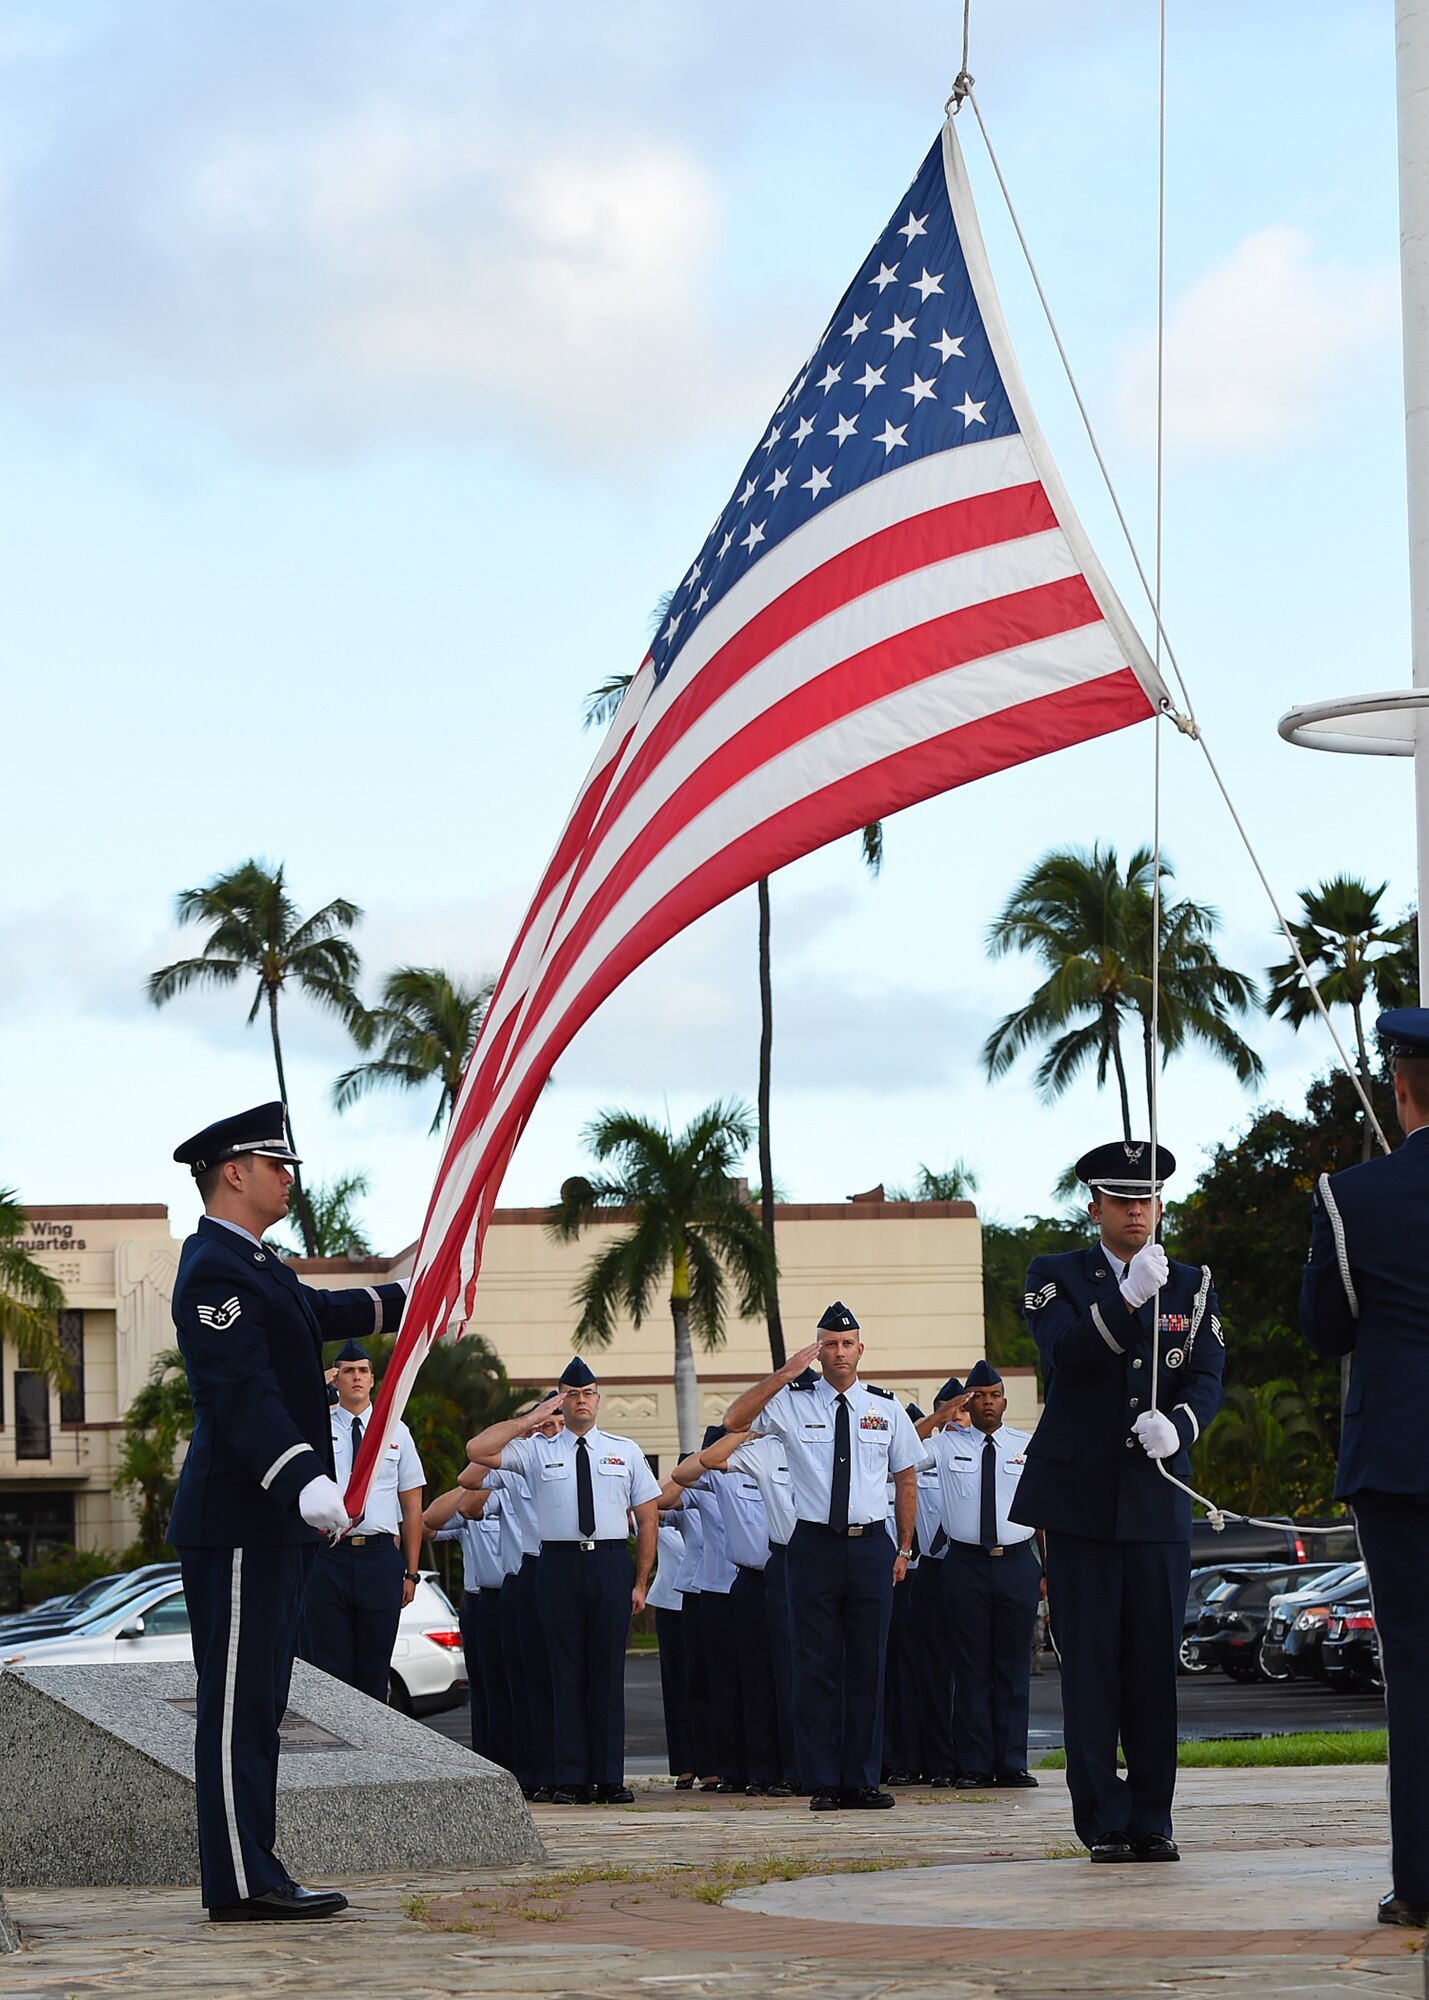 Airmen from Joint Base Pearl Harbor-Hickam’s Air Force Sergeant’s Association salute during a POW/MIA revile ceremony, on JBPHH, Hawaii, Sept. 14, 2015. The ceremony begins this year’s POW/MIA week, which honors the 1,627 missing or unaccounted for military members  in all branches of armed  services. Some of the week’s events will include name readings of those missing or unaccounted for, a remembrance run and a honors and heritage ceremony, held at the Pearl Harbor visitor’s center.  (U.S. Air Force photo by Tech. Sgt. Aaron Oelrich/Released)